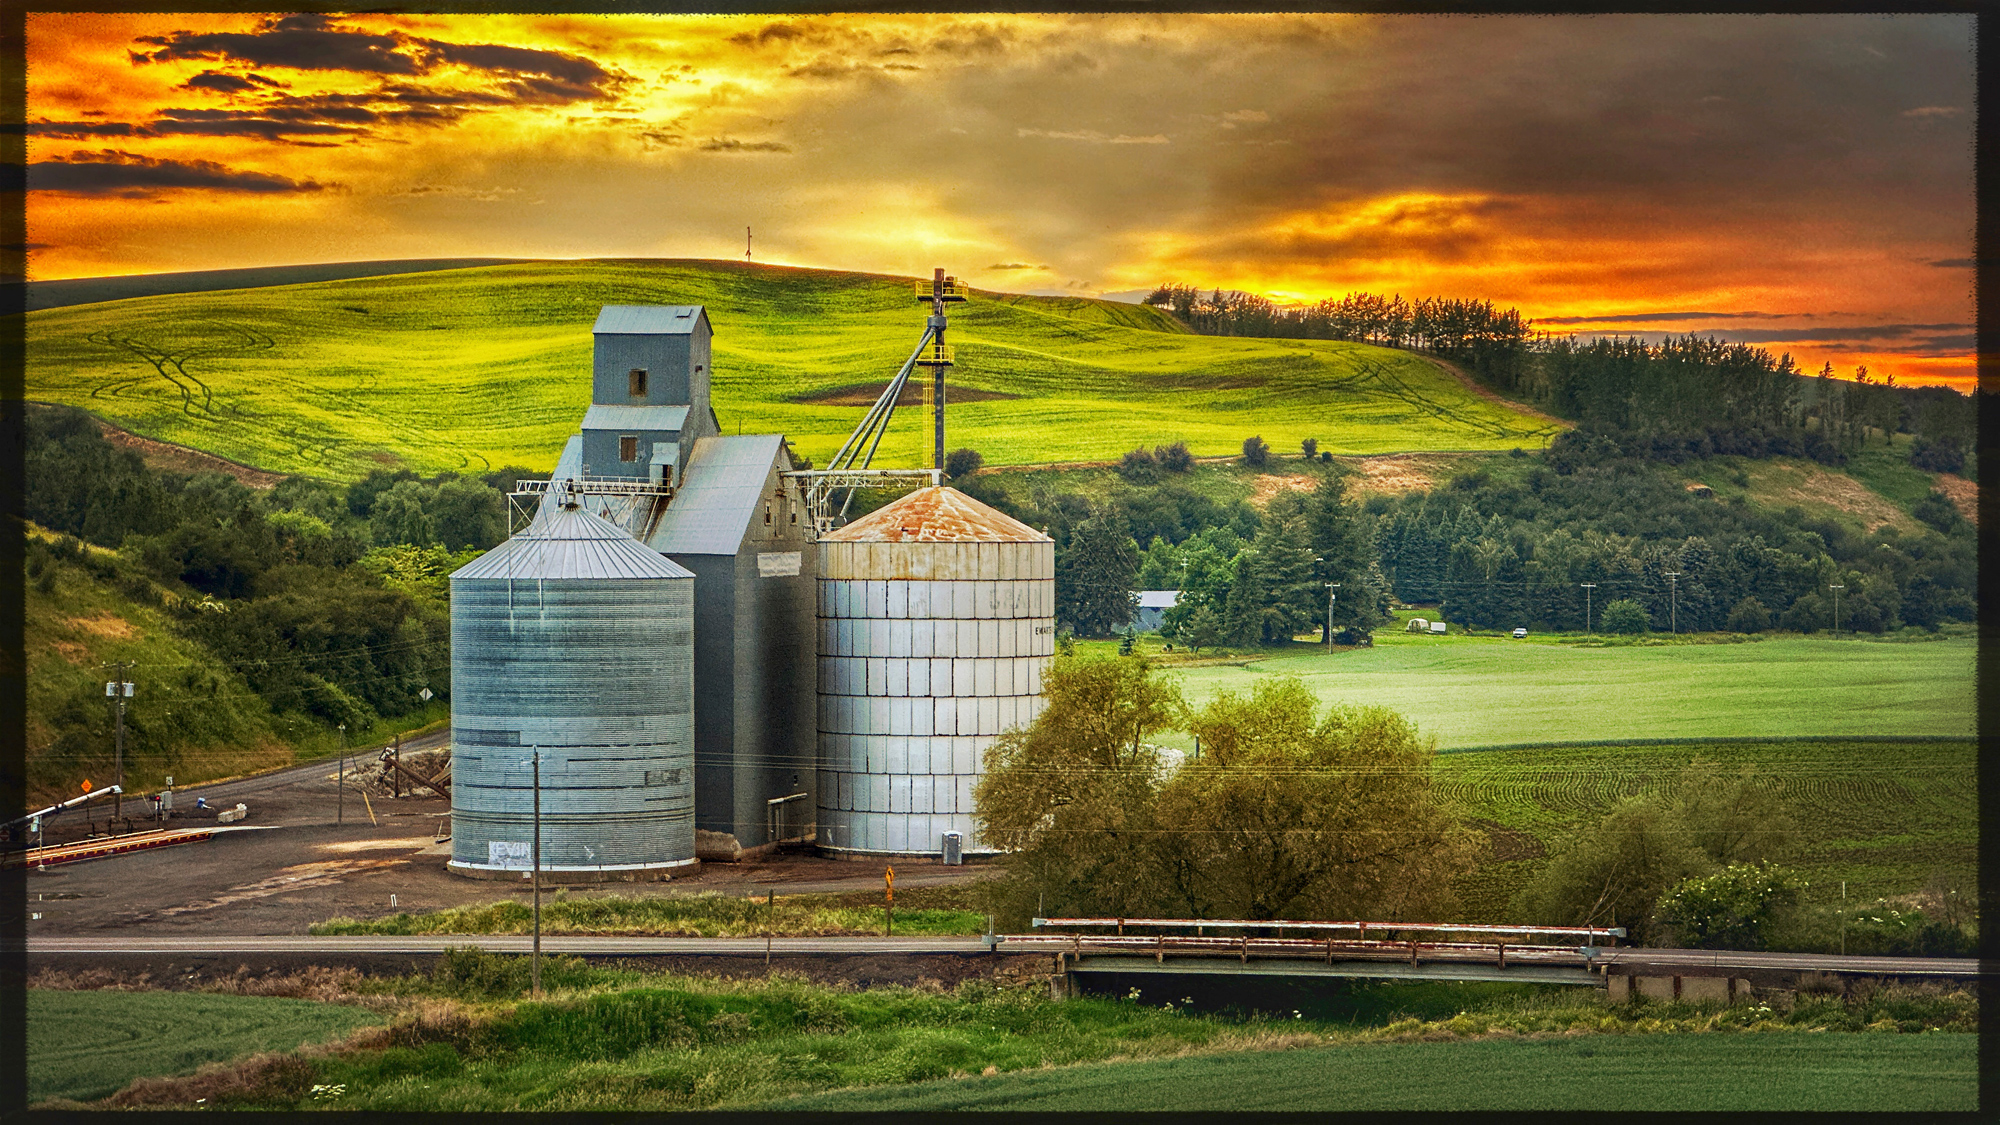 This is kind of iconic for the Palouse. Grain Silos, hillsides with crops and a sunset with amazing clouds.